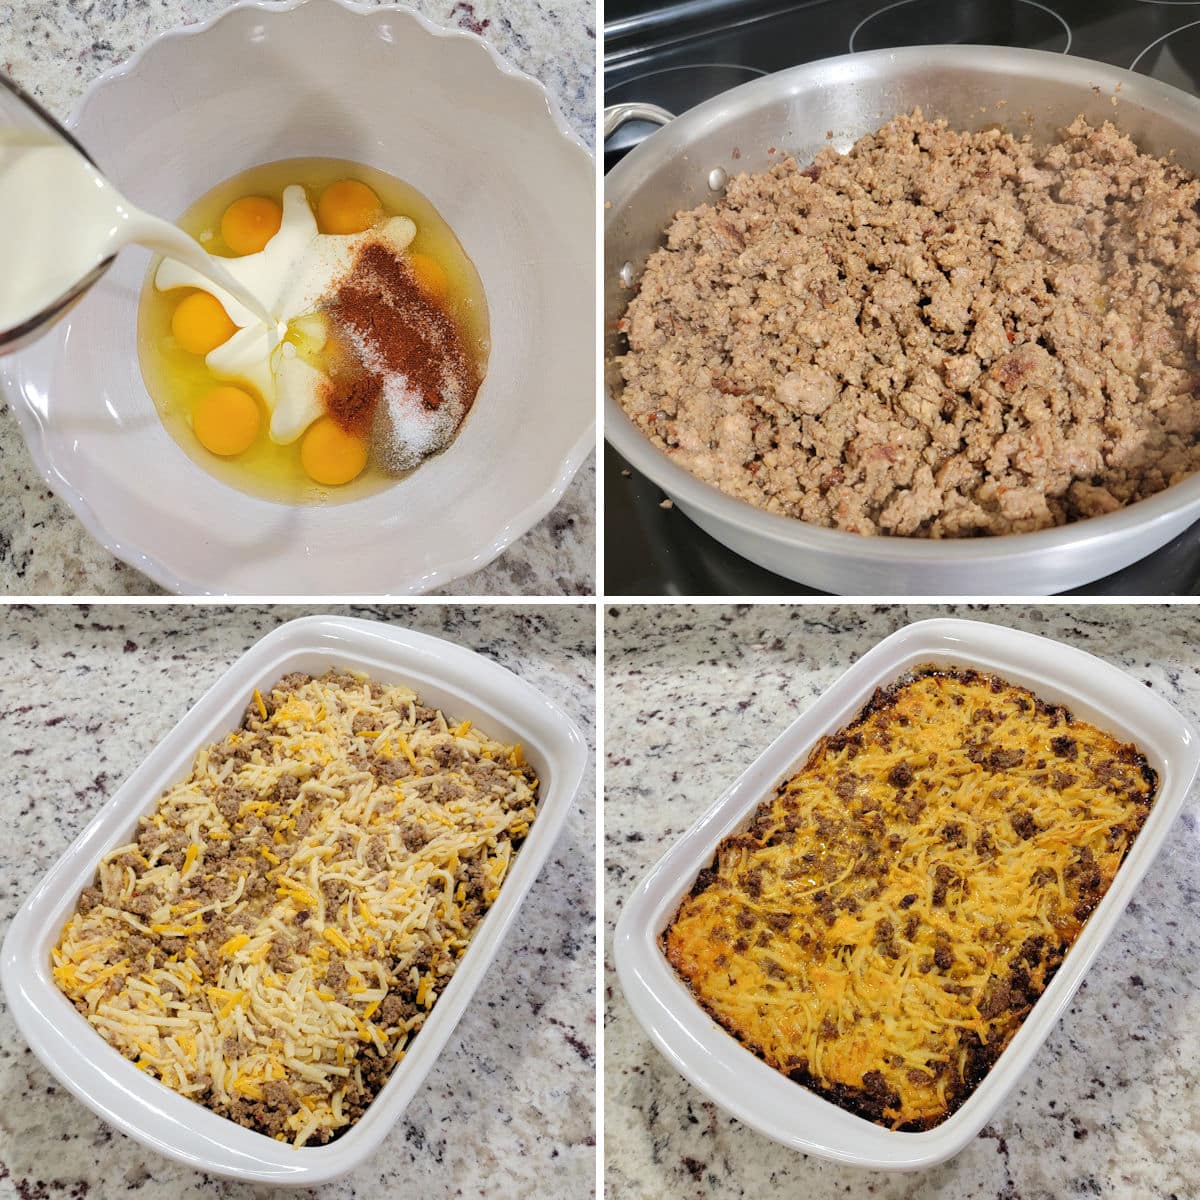 Assembling hash brown breakfast casserole ingredients and baking in a casserole dish.